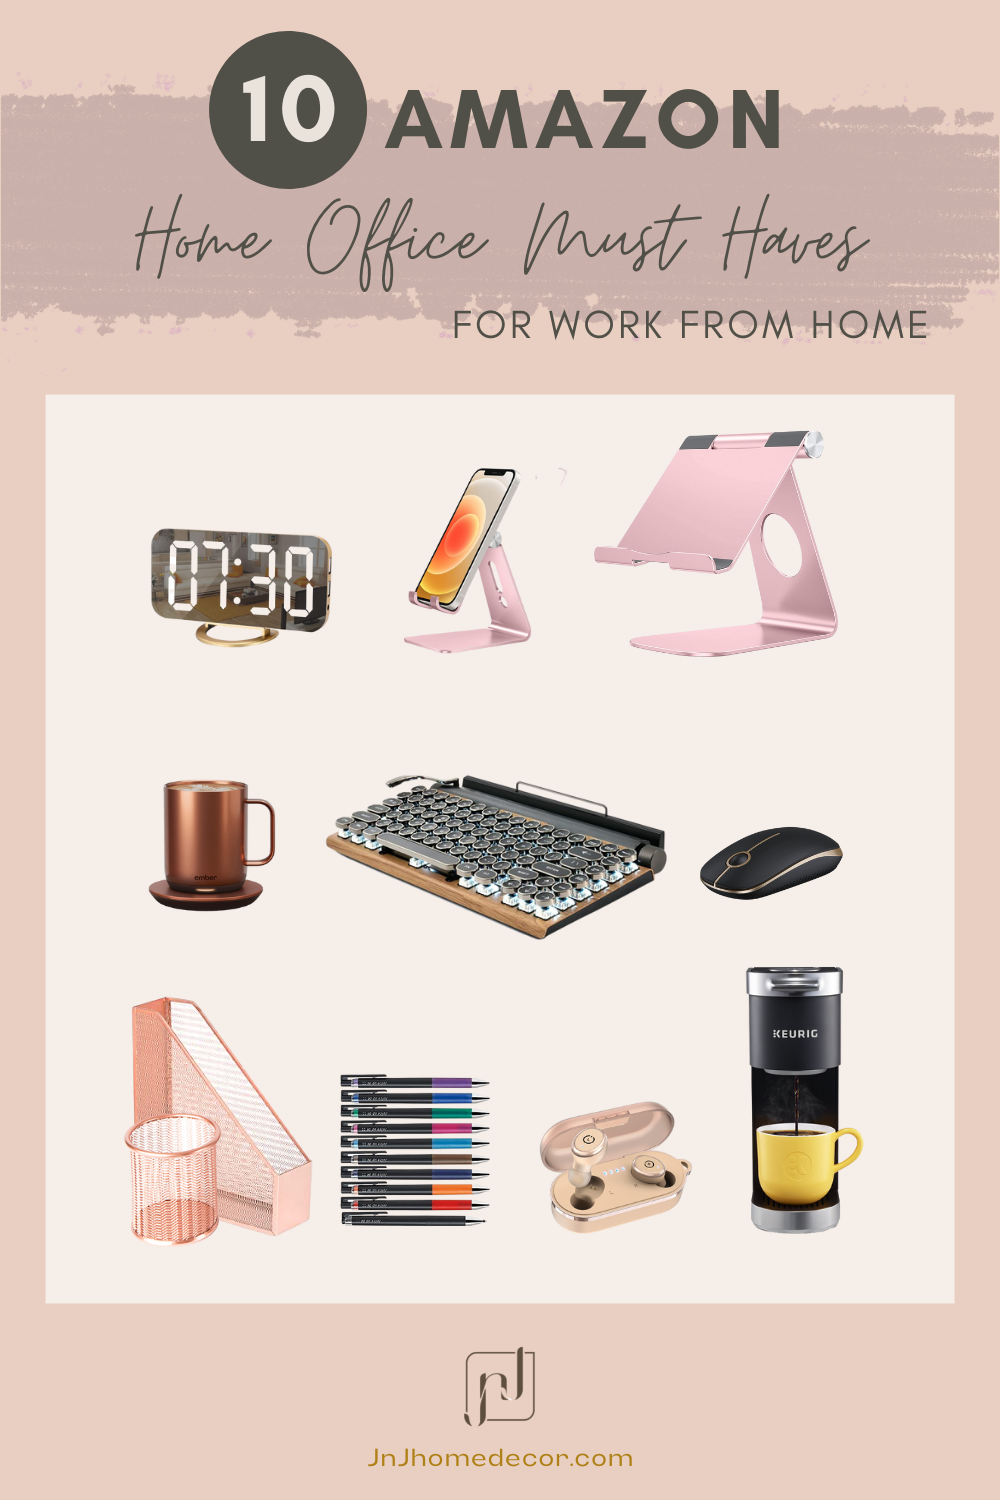 Home Office Must-Haves From